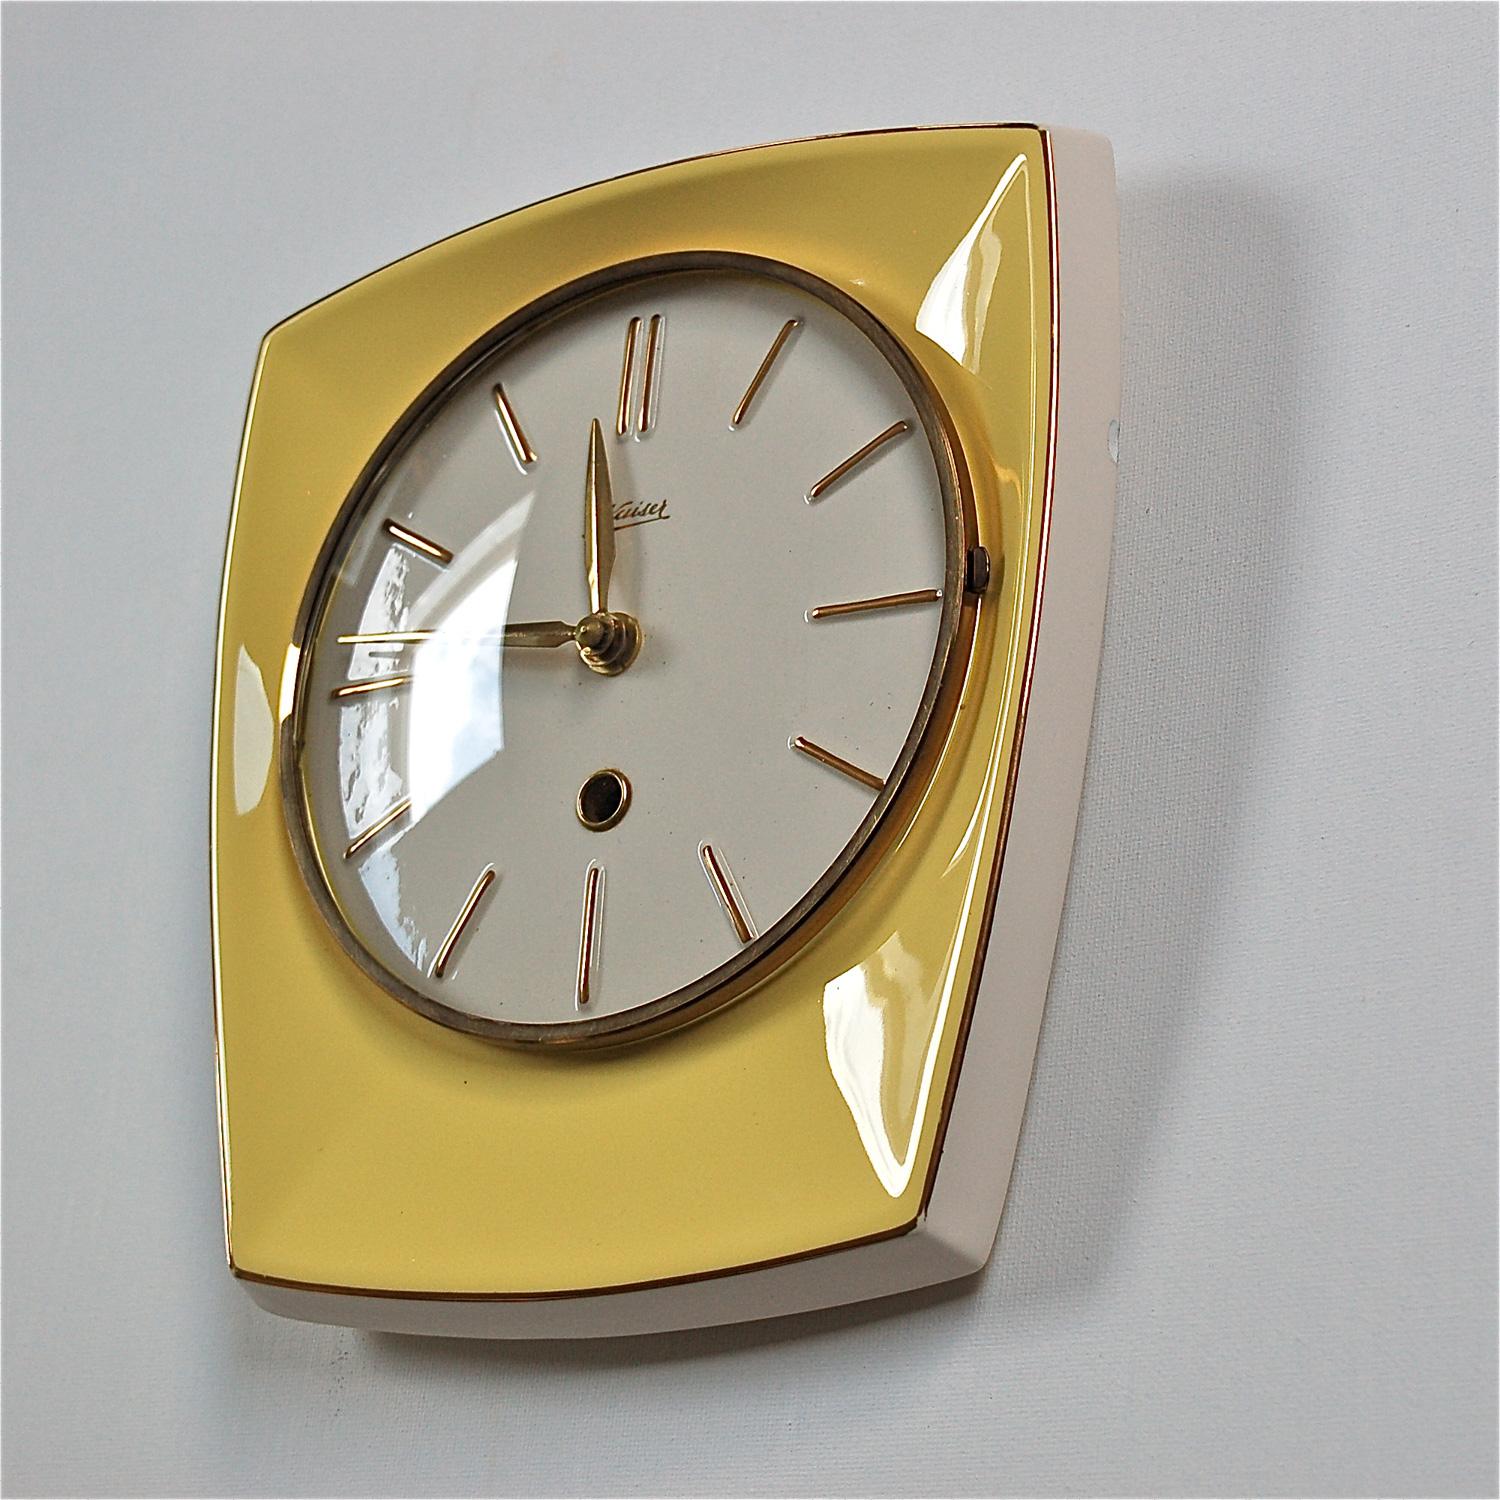 1950s vintage ceramic wall clock by Kaiser. The circular clock face sits is a rectangular base with curved edges. The ceramic base is cream colored with a custard yellow glazed front. The clock has a hinged glass front with a thin brass bezel. The